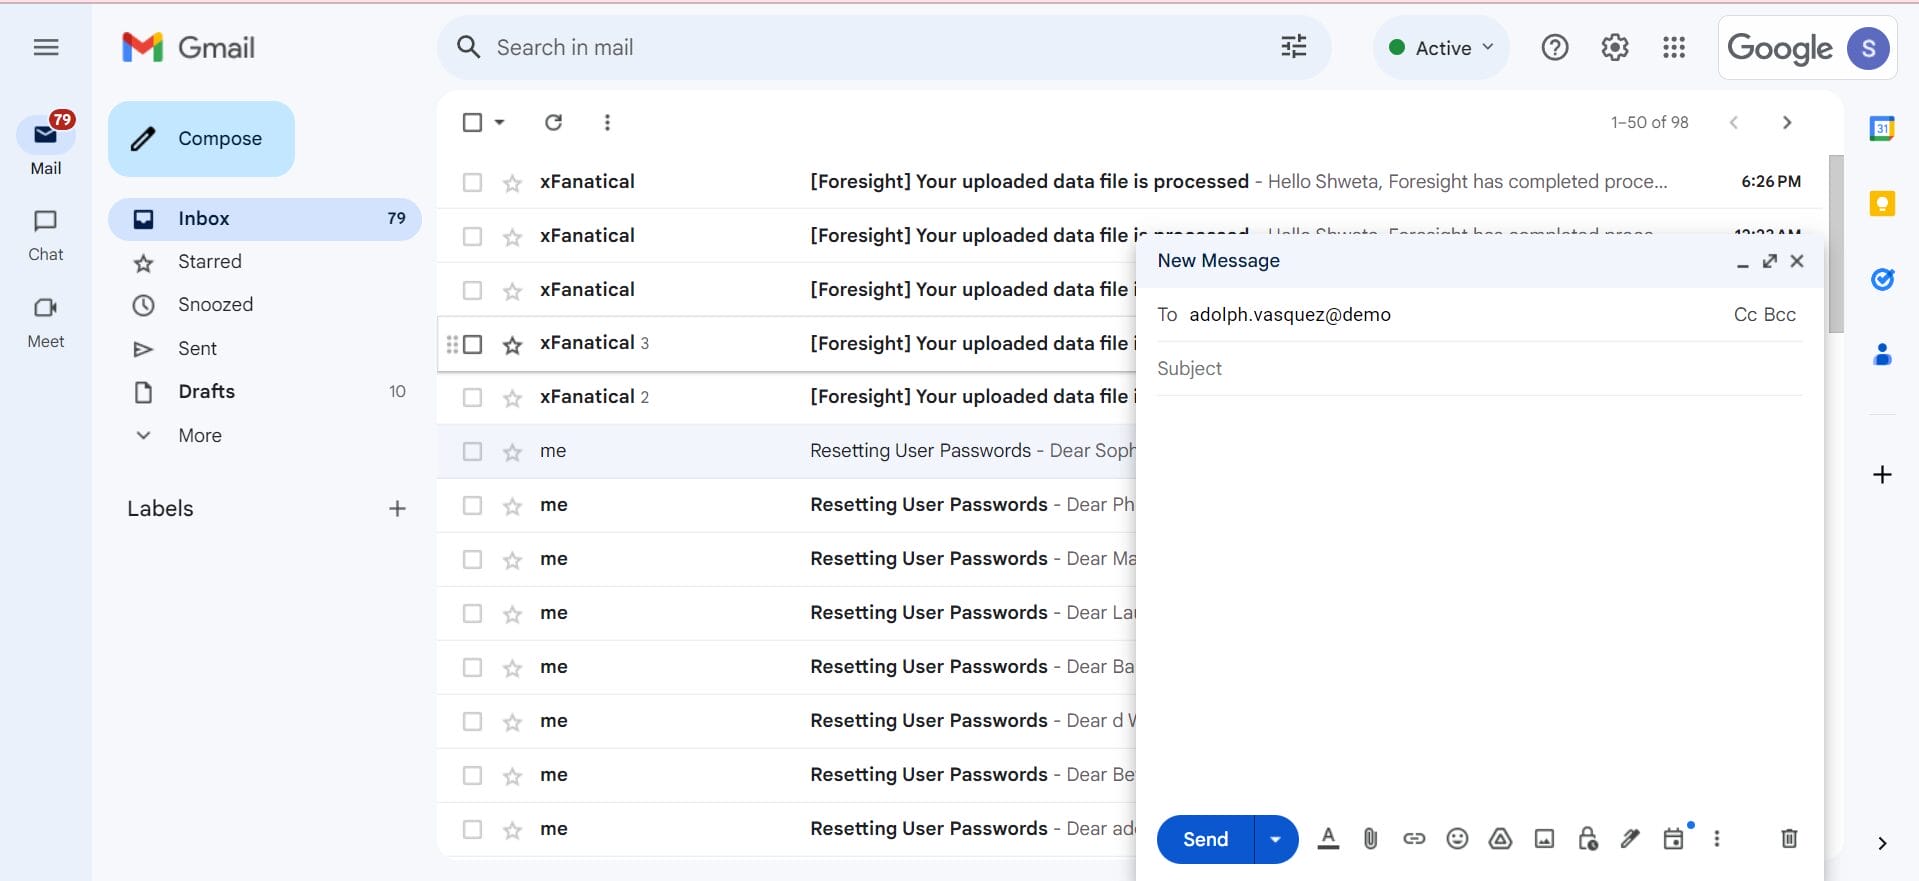 confirm the results across Google services—Gmail